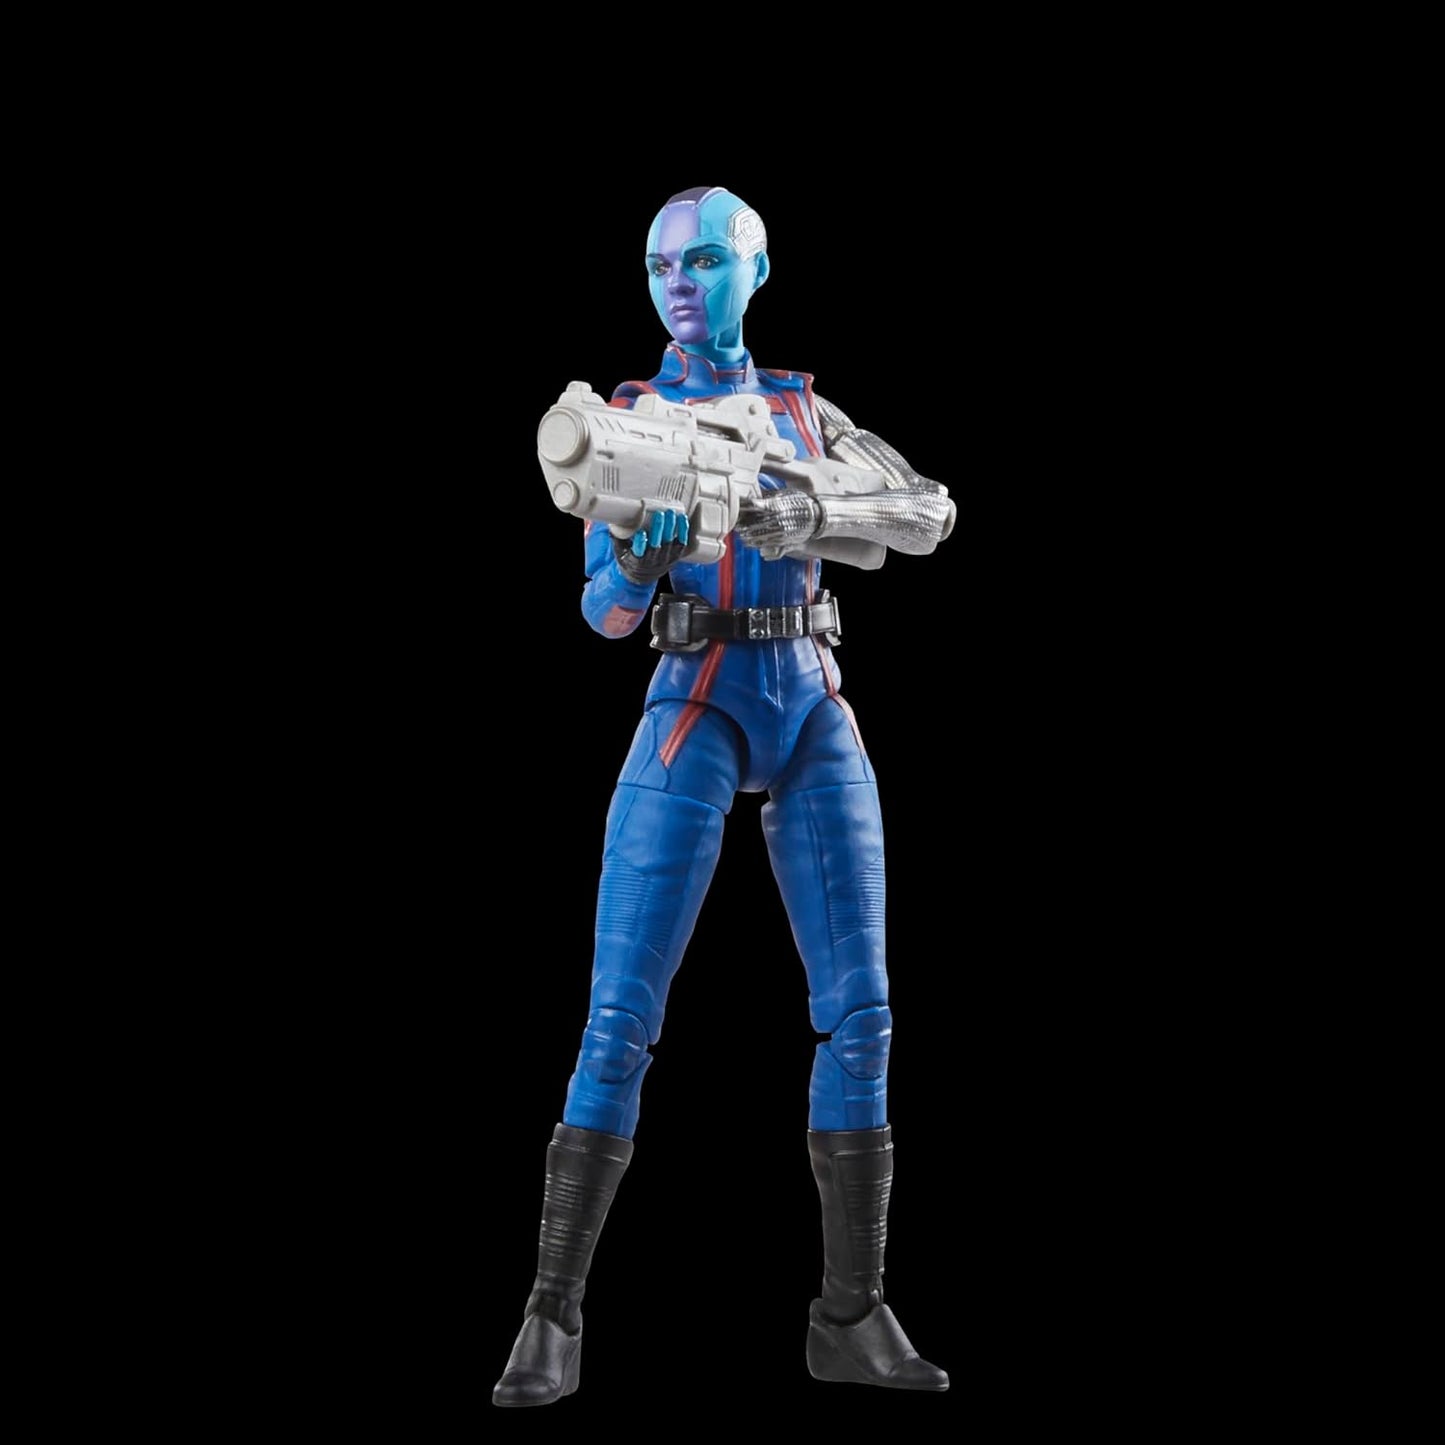 Marvel Legends Series Nebula Guardians of The Galaxy Vol. 3 6-Inch Collectible Action Figure